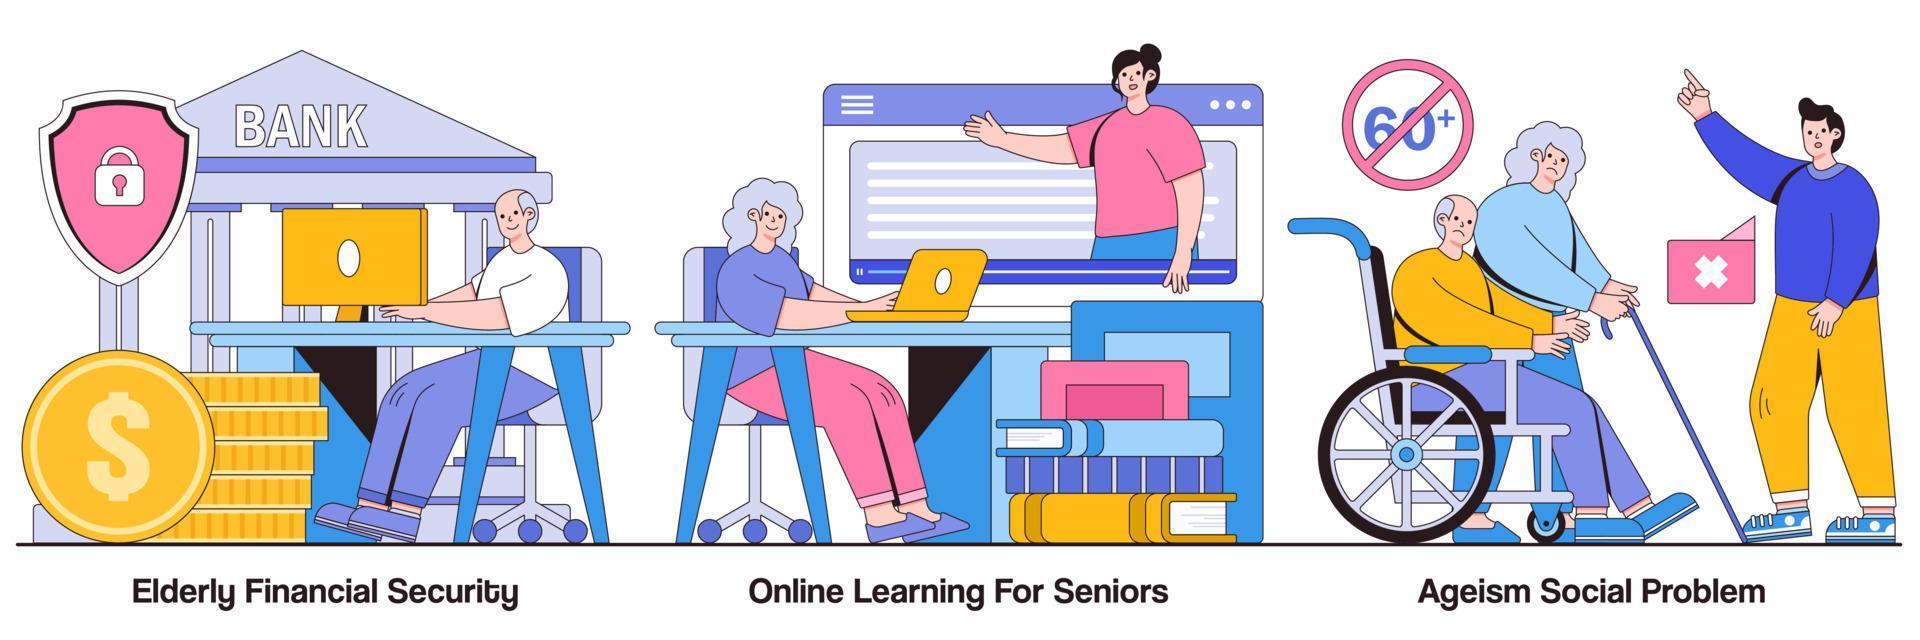 Elderly Financial Security, Online Learning for Seniors, and Ageism Social Problem Illustrated Pack vector